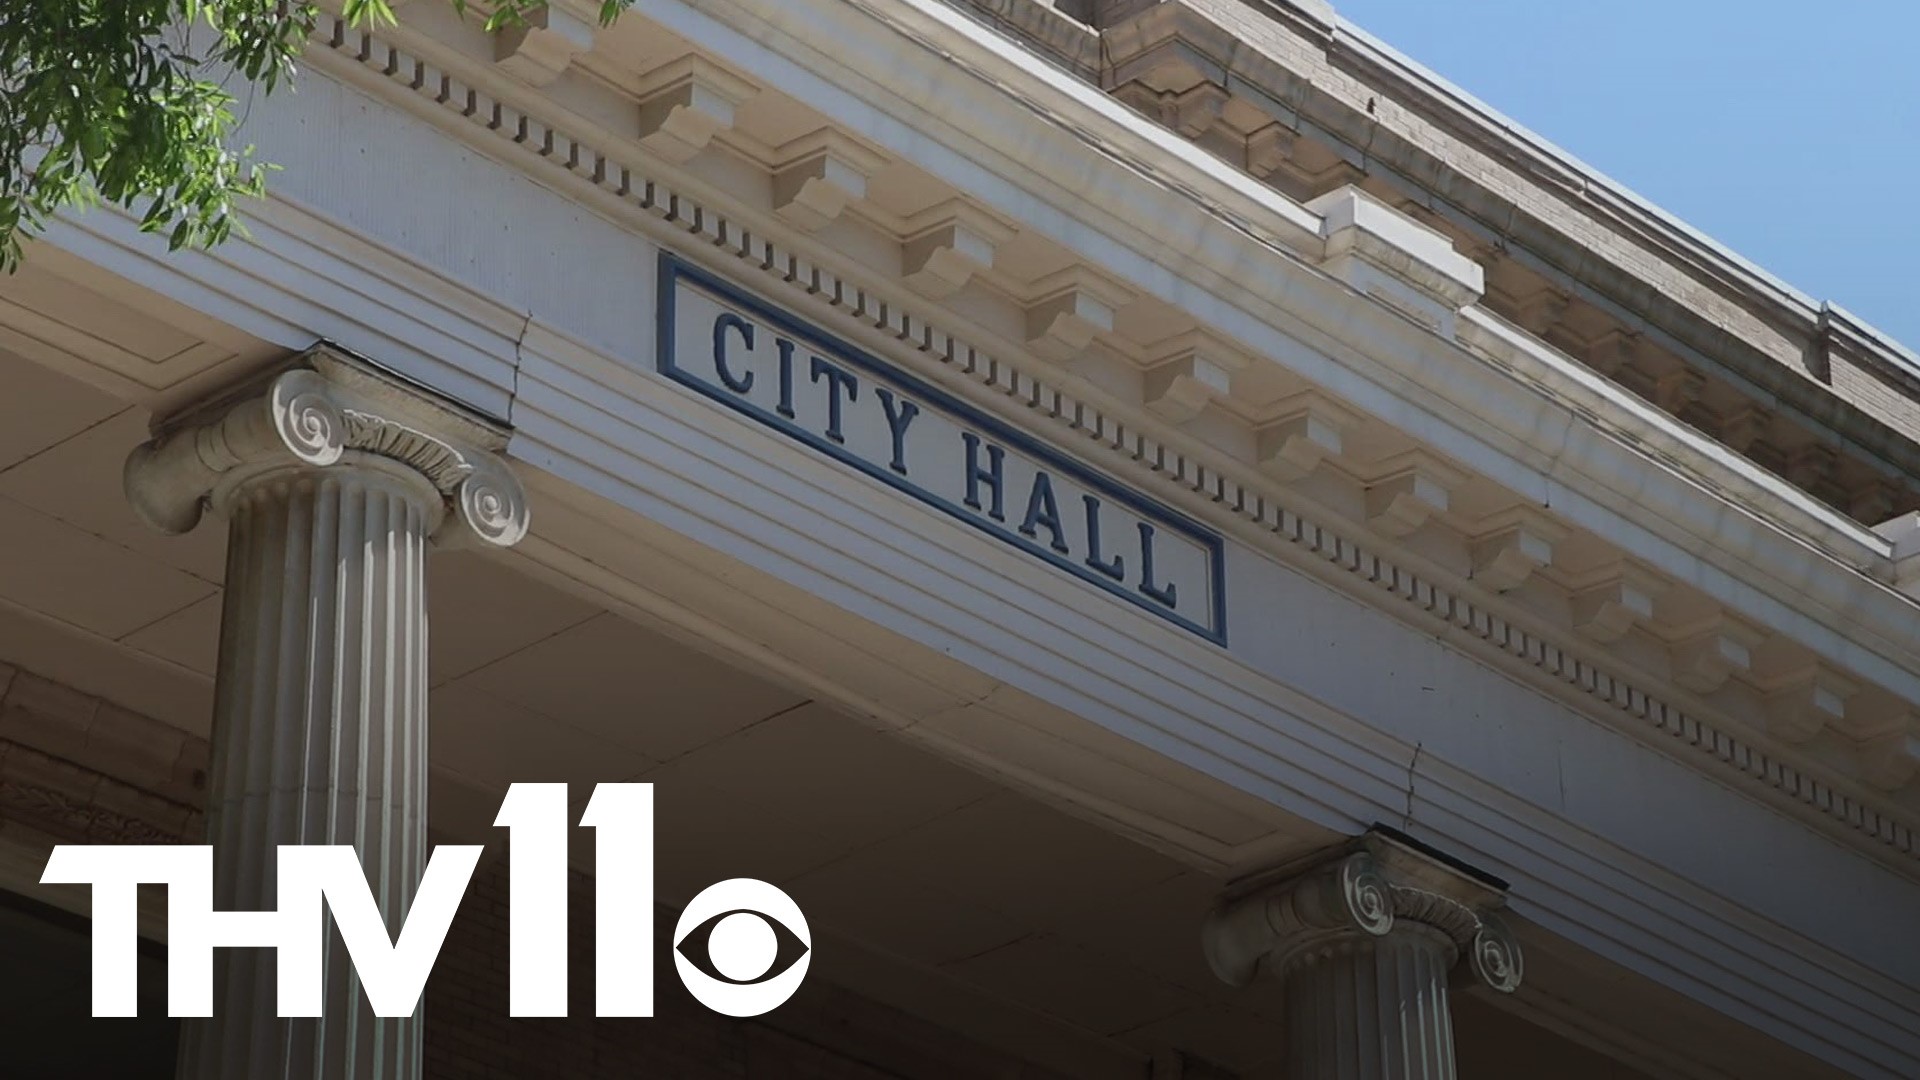 From street racing to youth violence to the penny sales tax, the Little Rock city board has a stacked agenda Tuesday night.